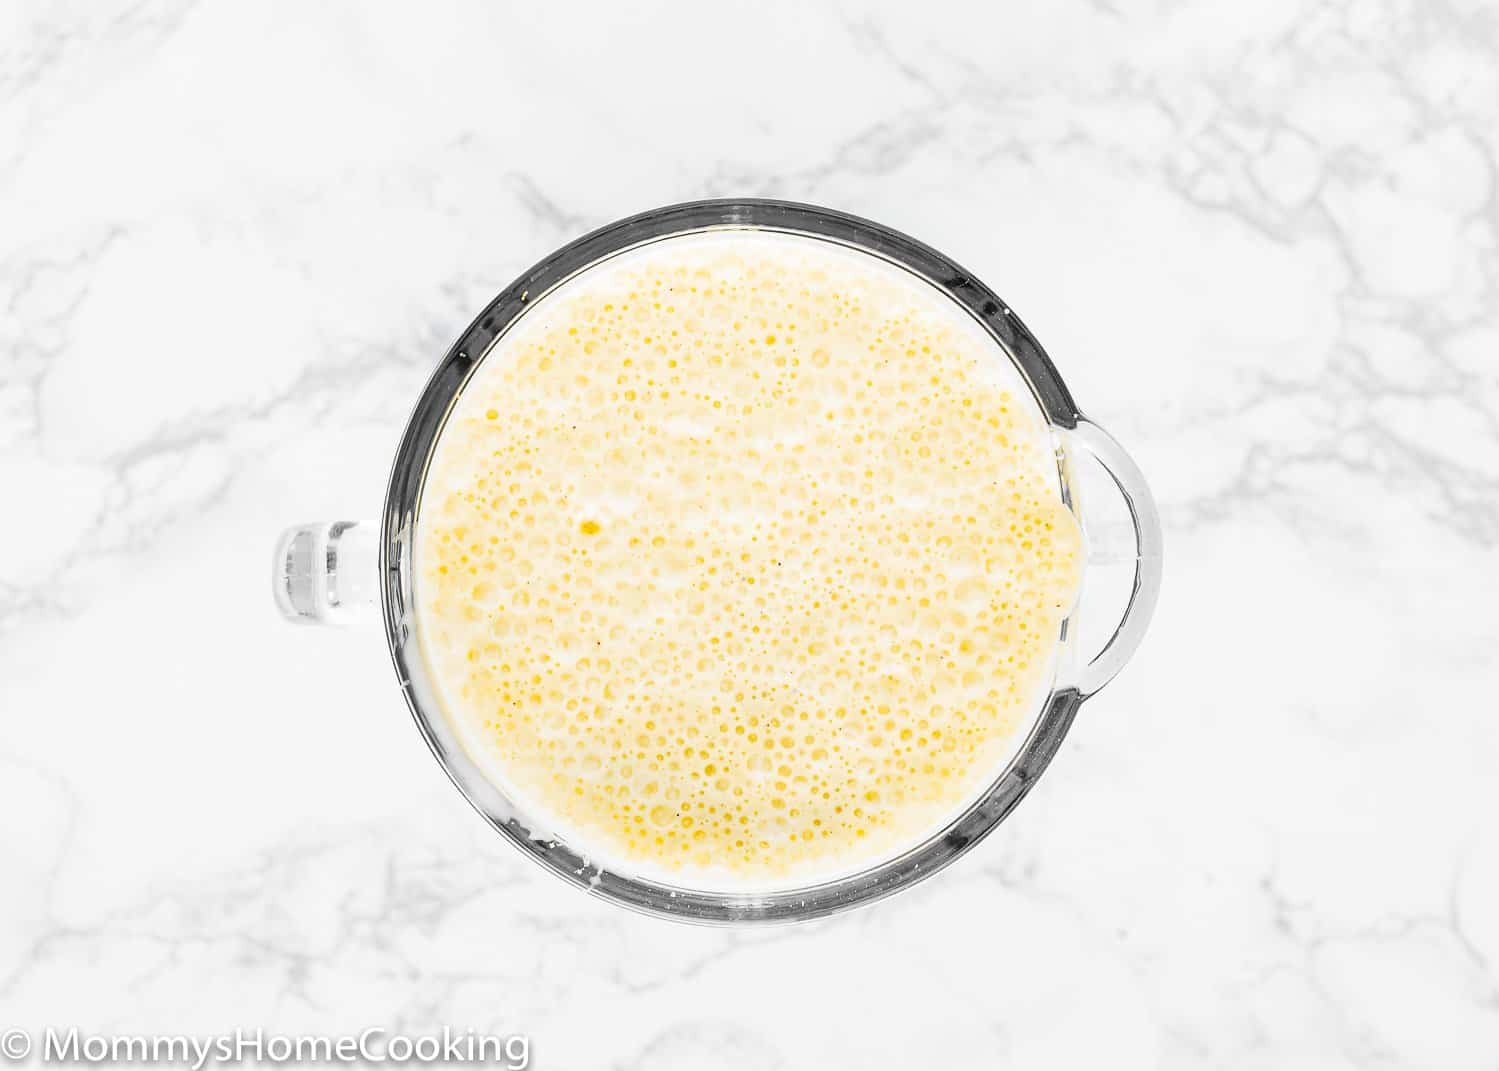 ponche crema ingredients in a blender